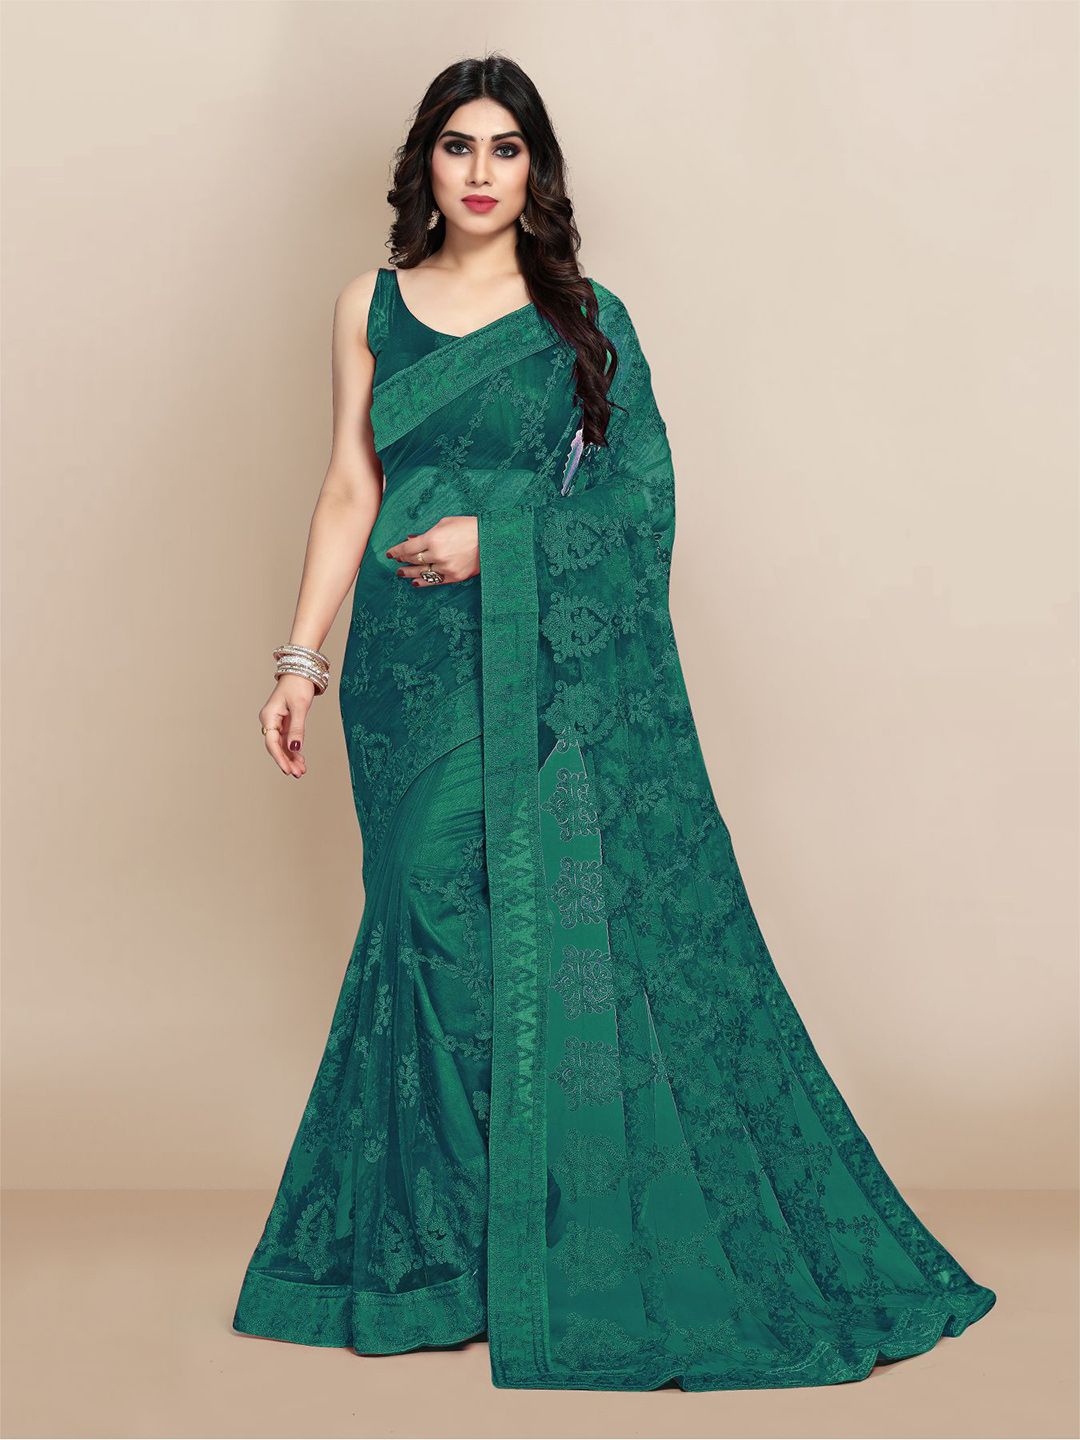 VAIRAGEE Green Floral Embroidered Net Saree Price in India